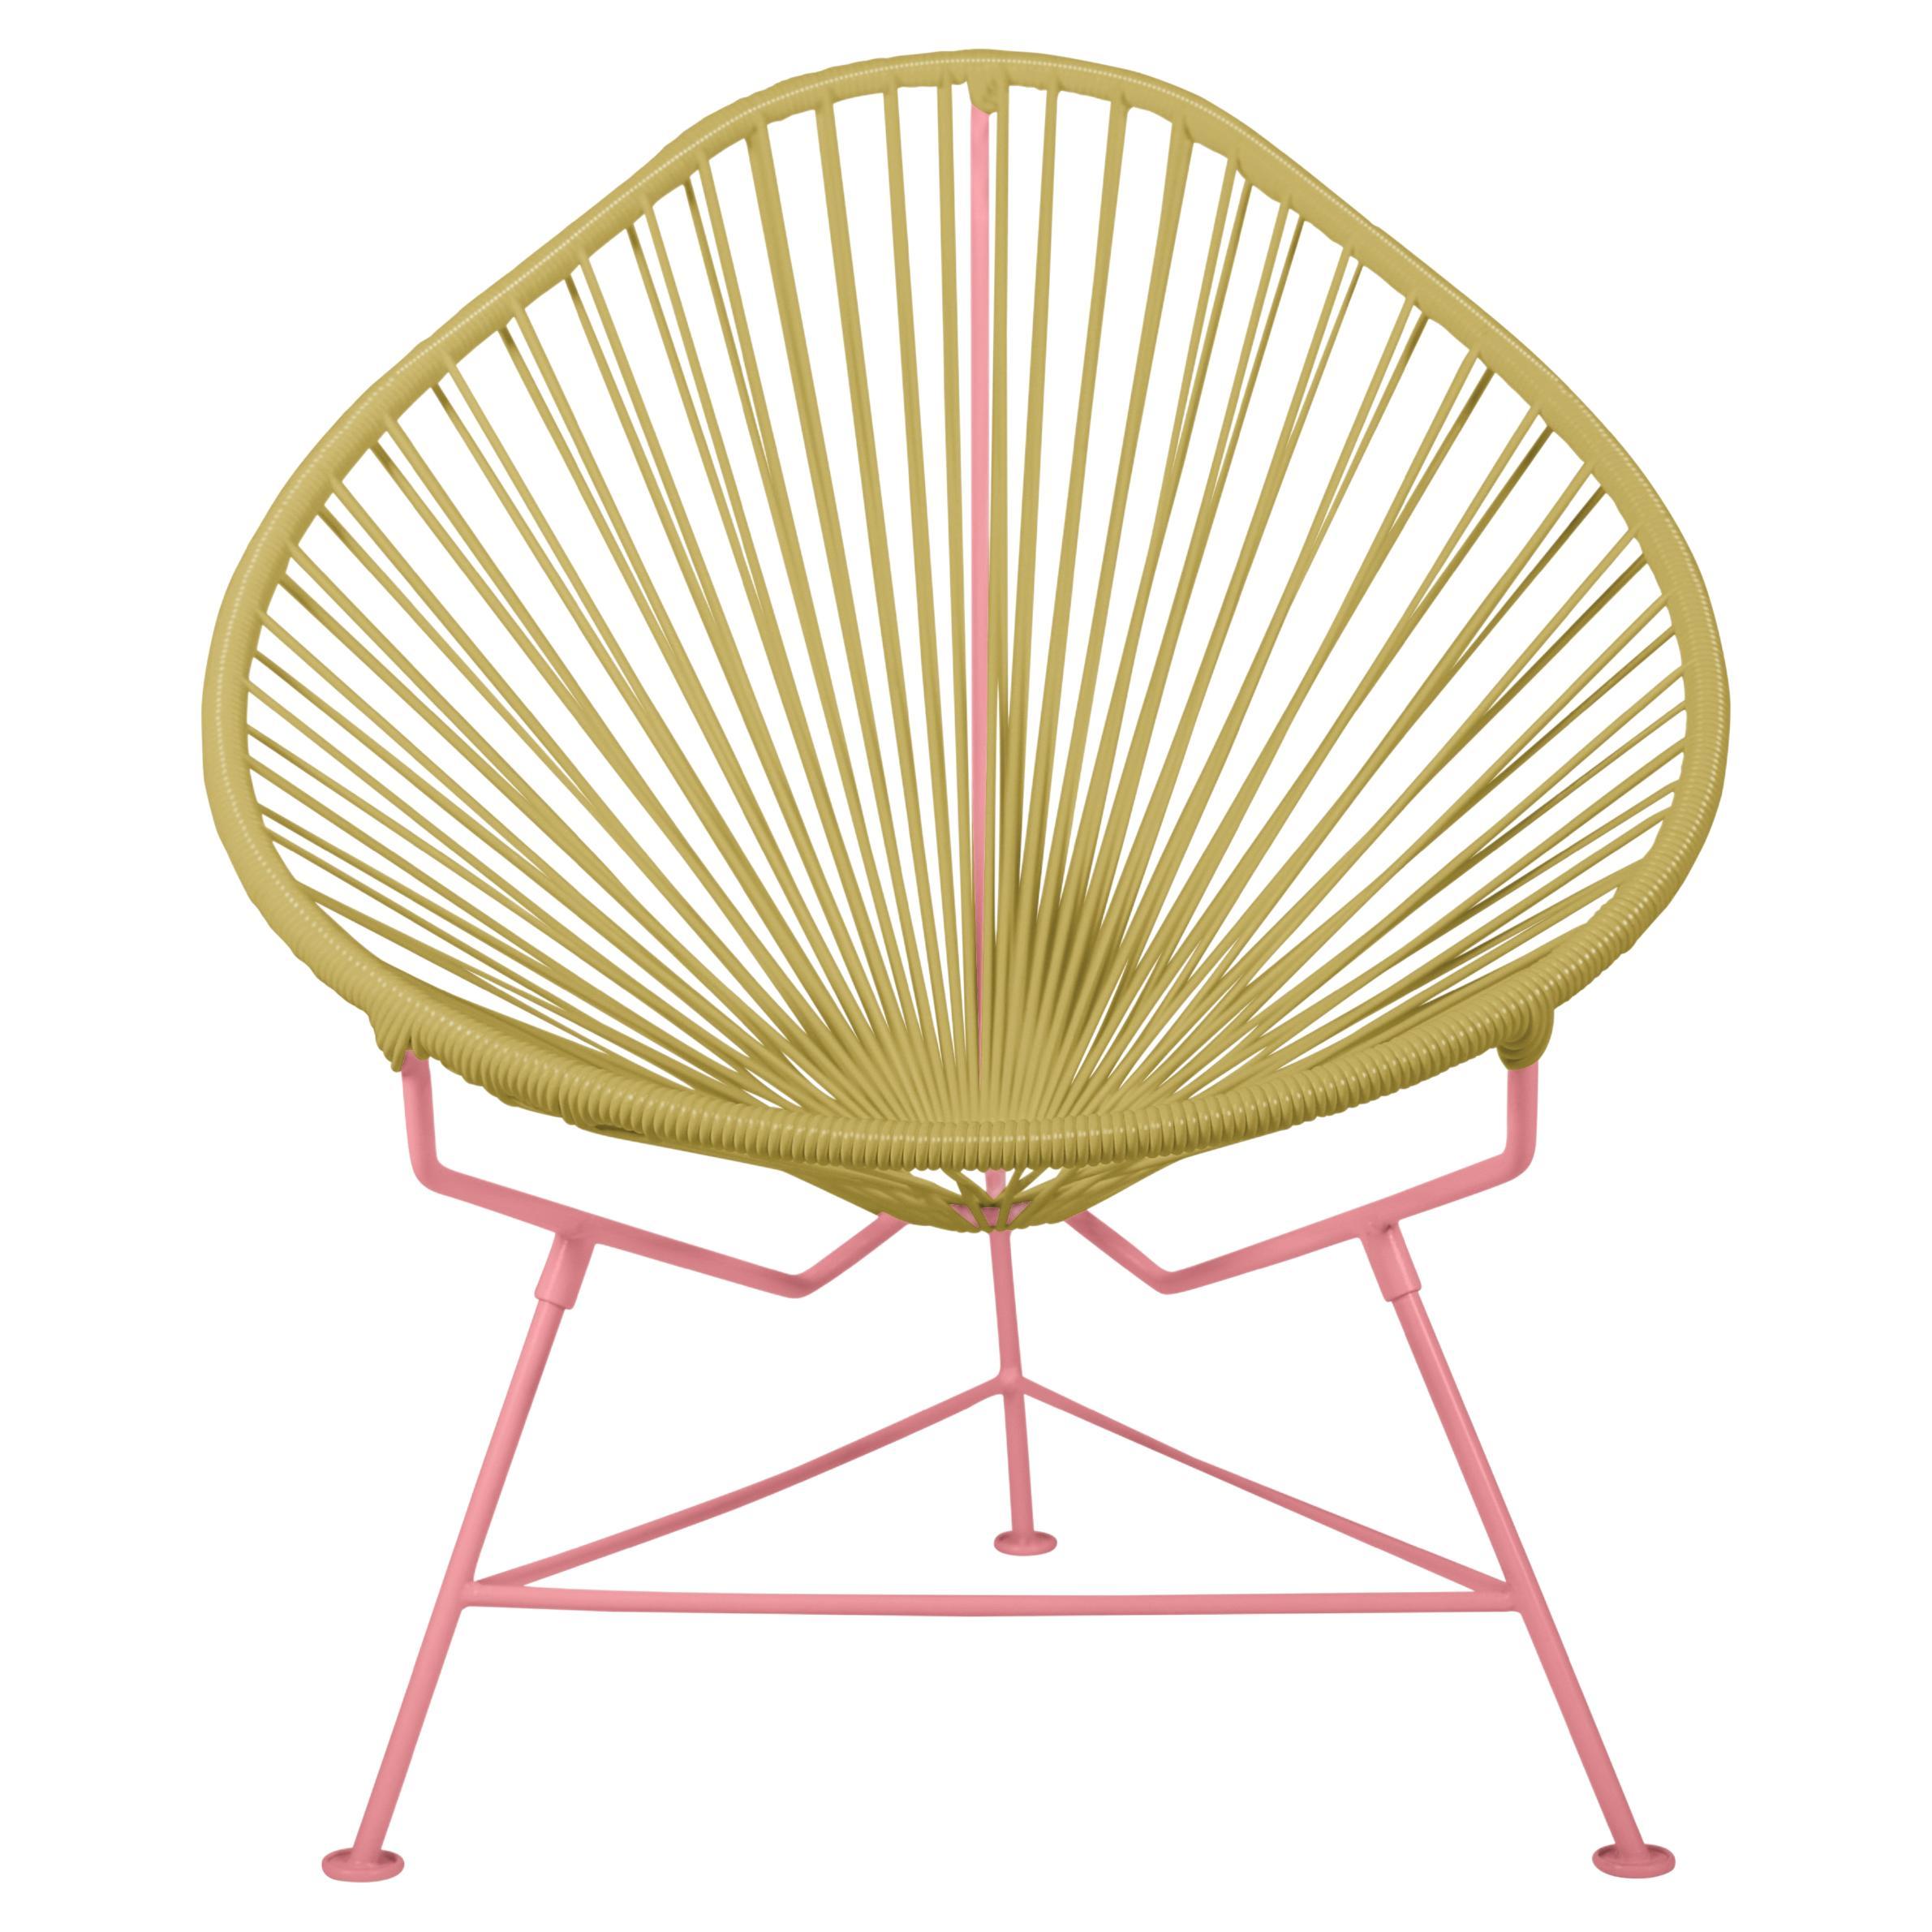 Innit Designs Acapulco Chair Gold Weave on Coral Frame For Sale